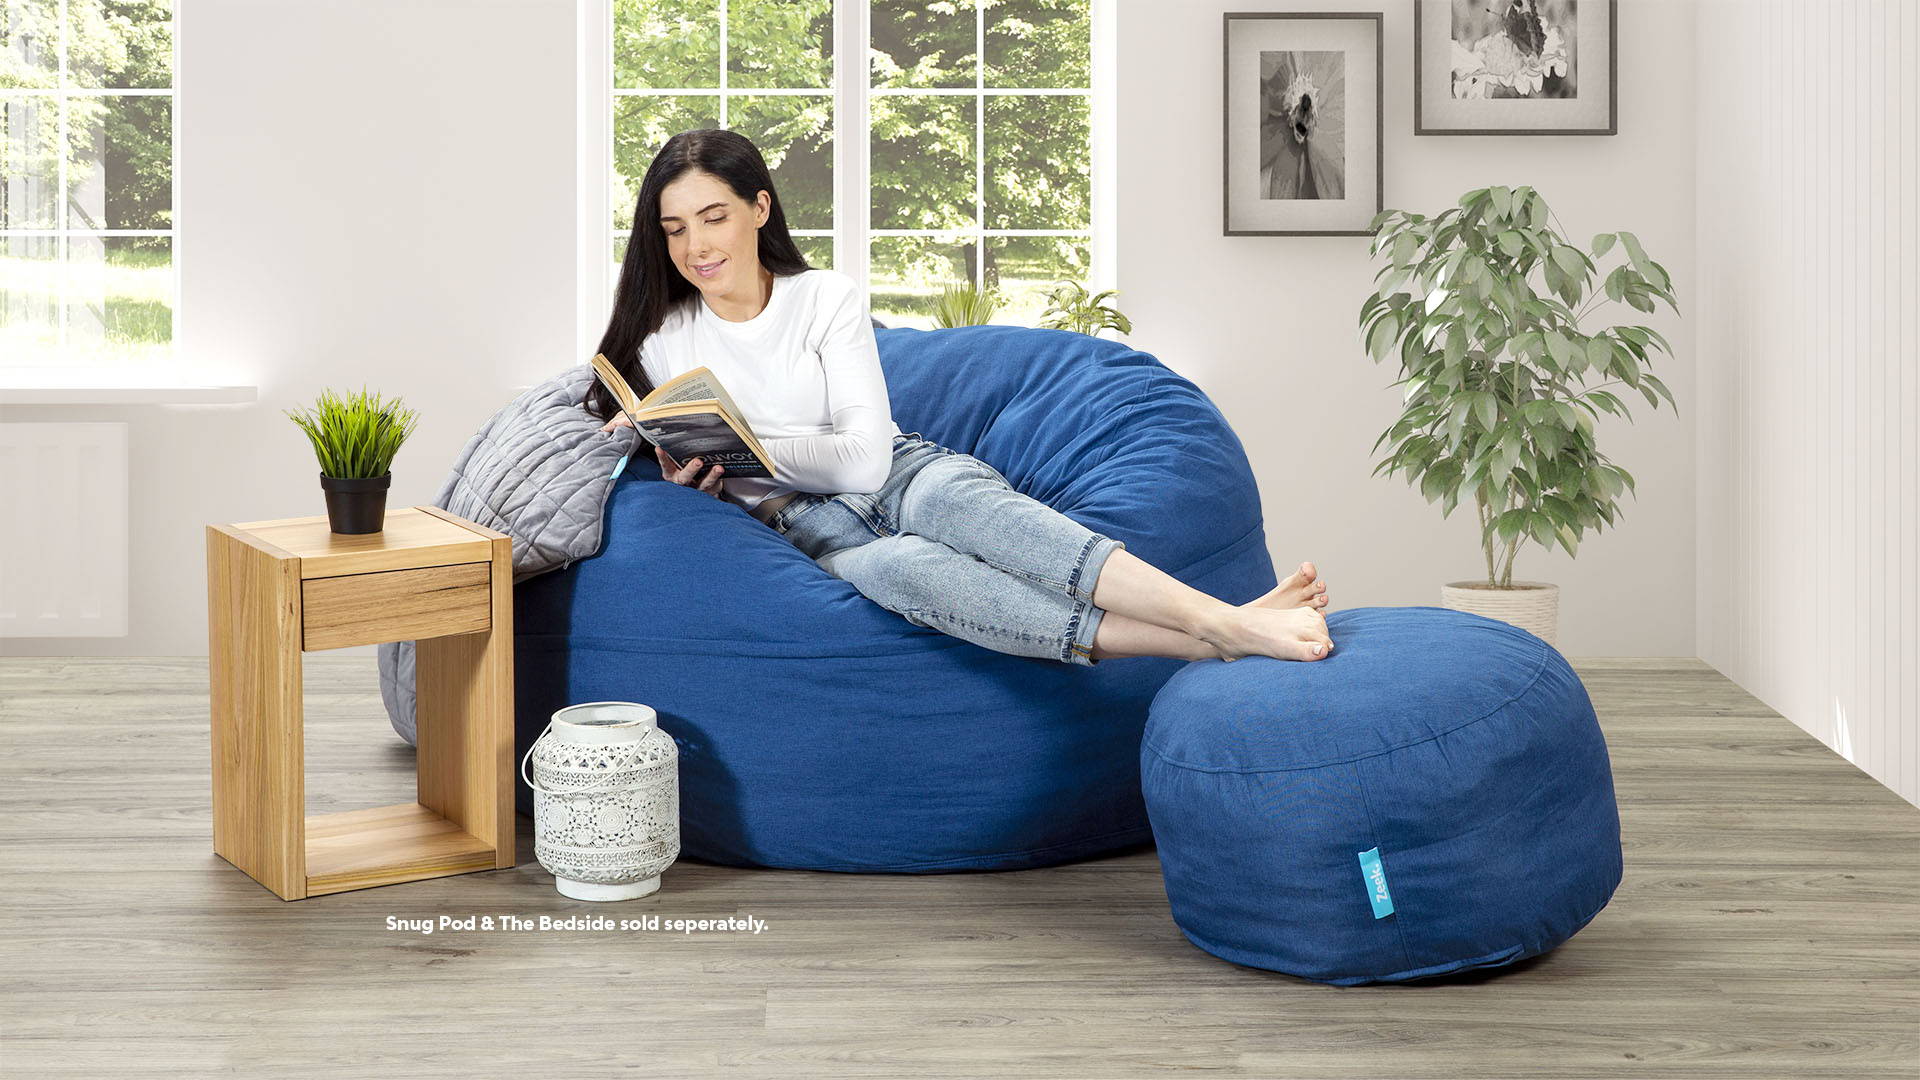 Try out The Footstool, a new product from Zeek.com.au